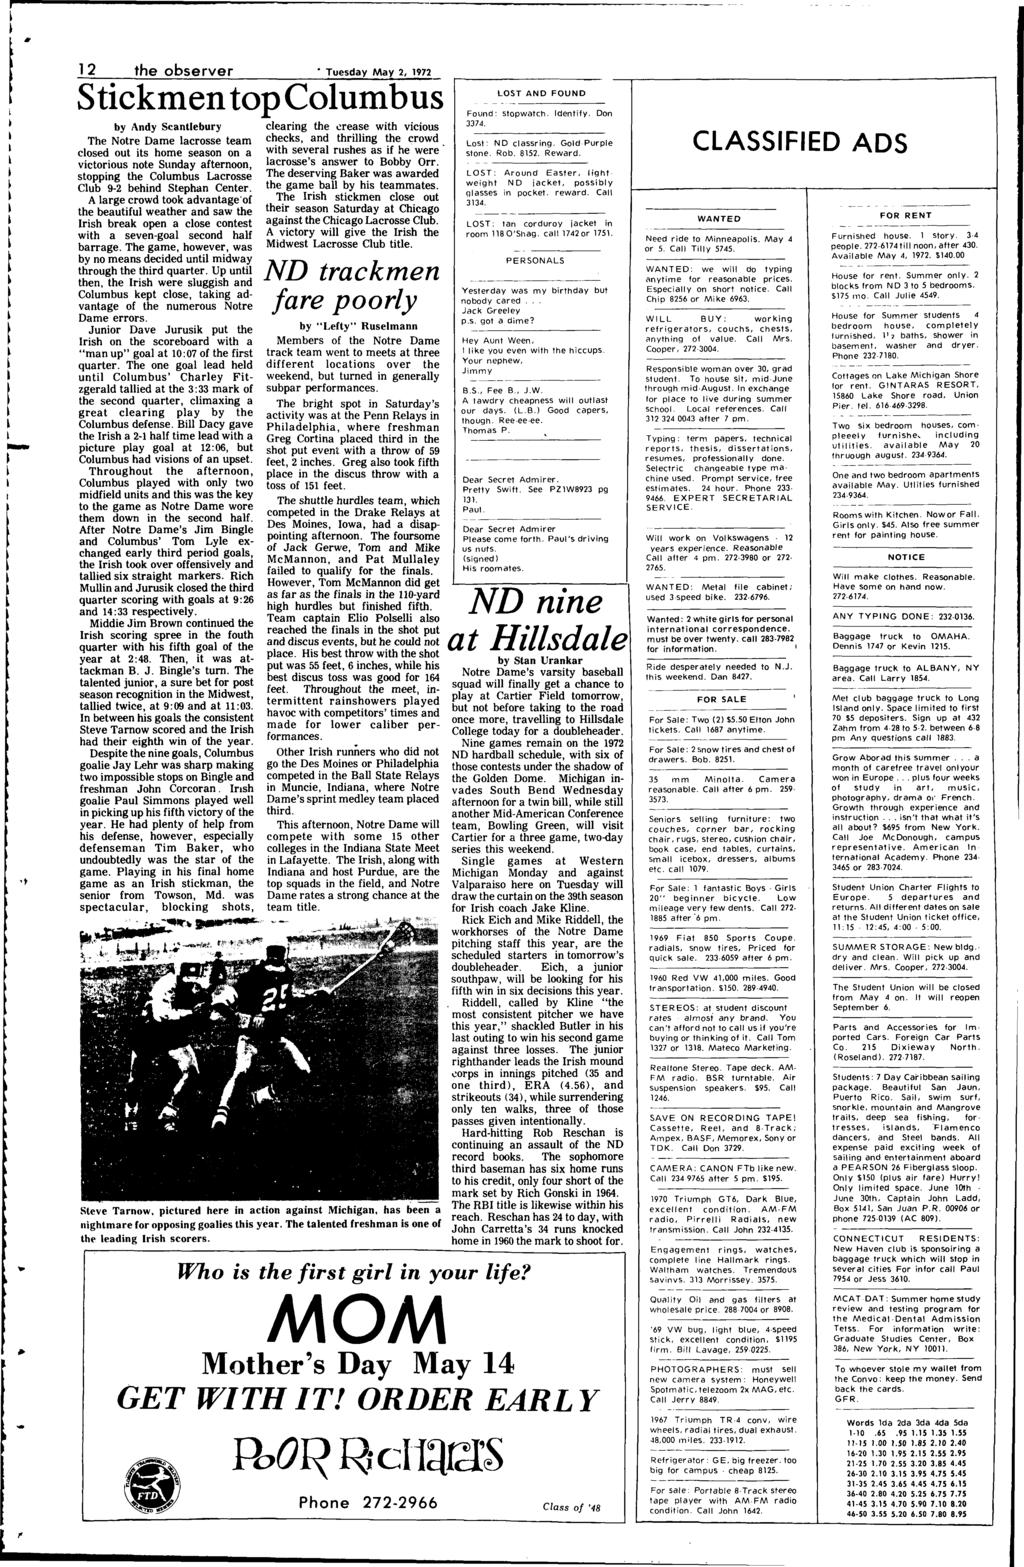 ... 1 2 the observer Tuesday May 2, 1972 Stickmen top Columbus by Andy Scantlebury The Notre Dame lacrosse team closed out its home season on a victorious note Sunday afternoon, stopping the Columbus